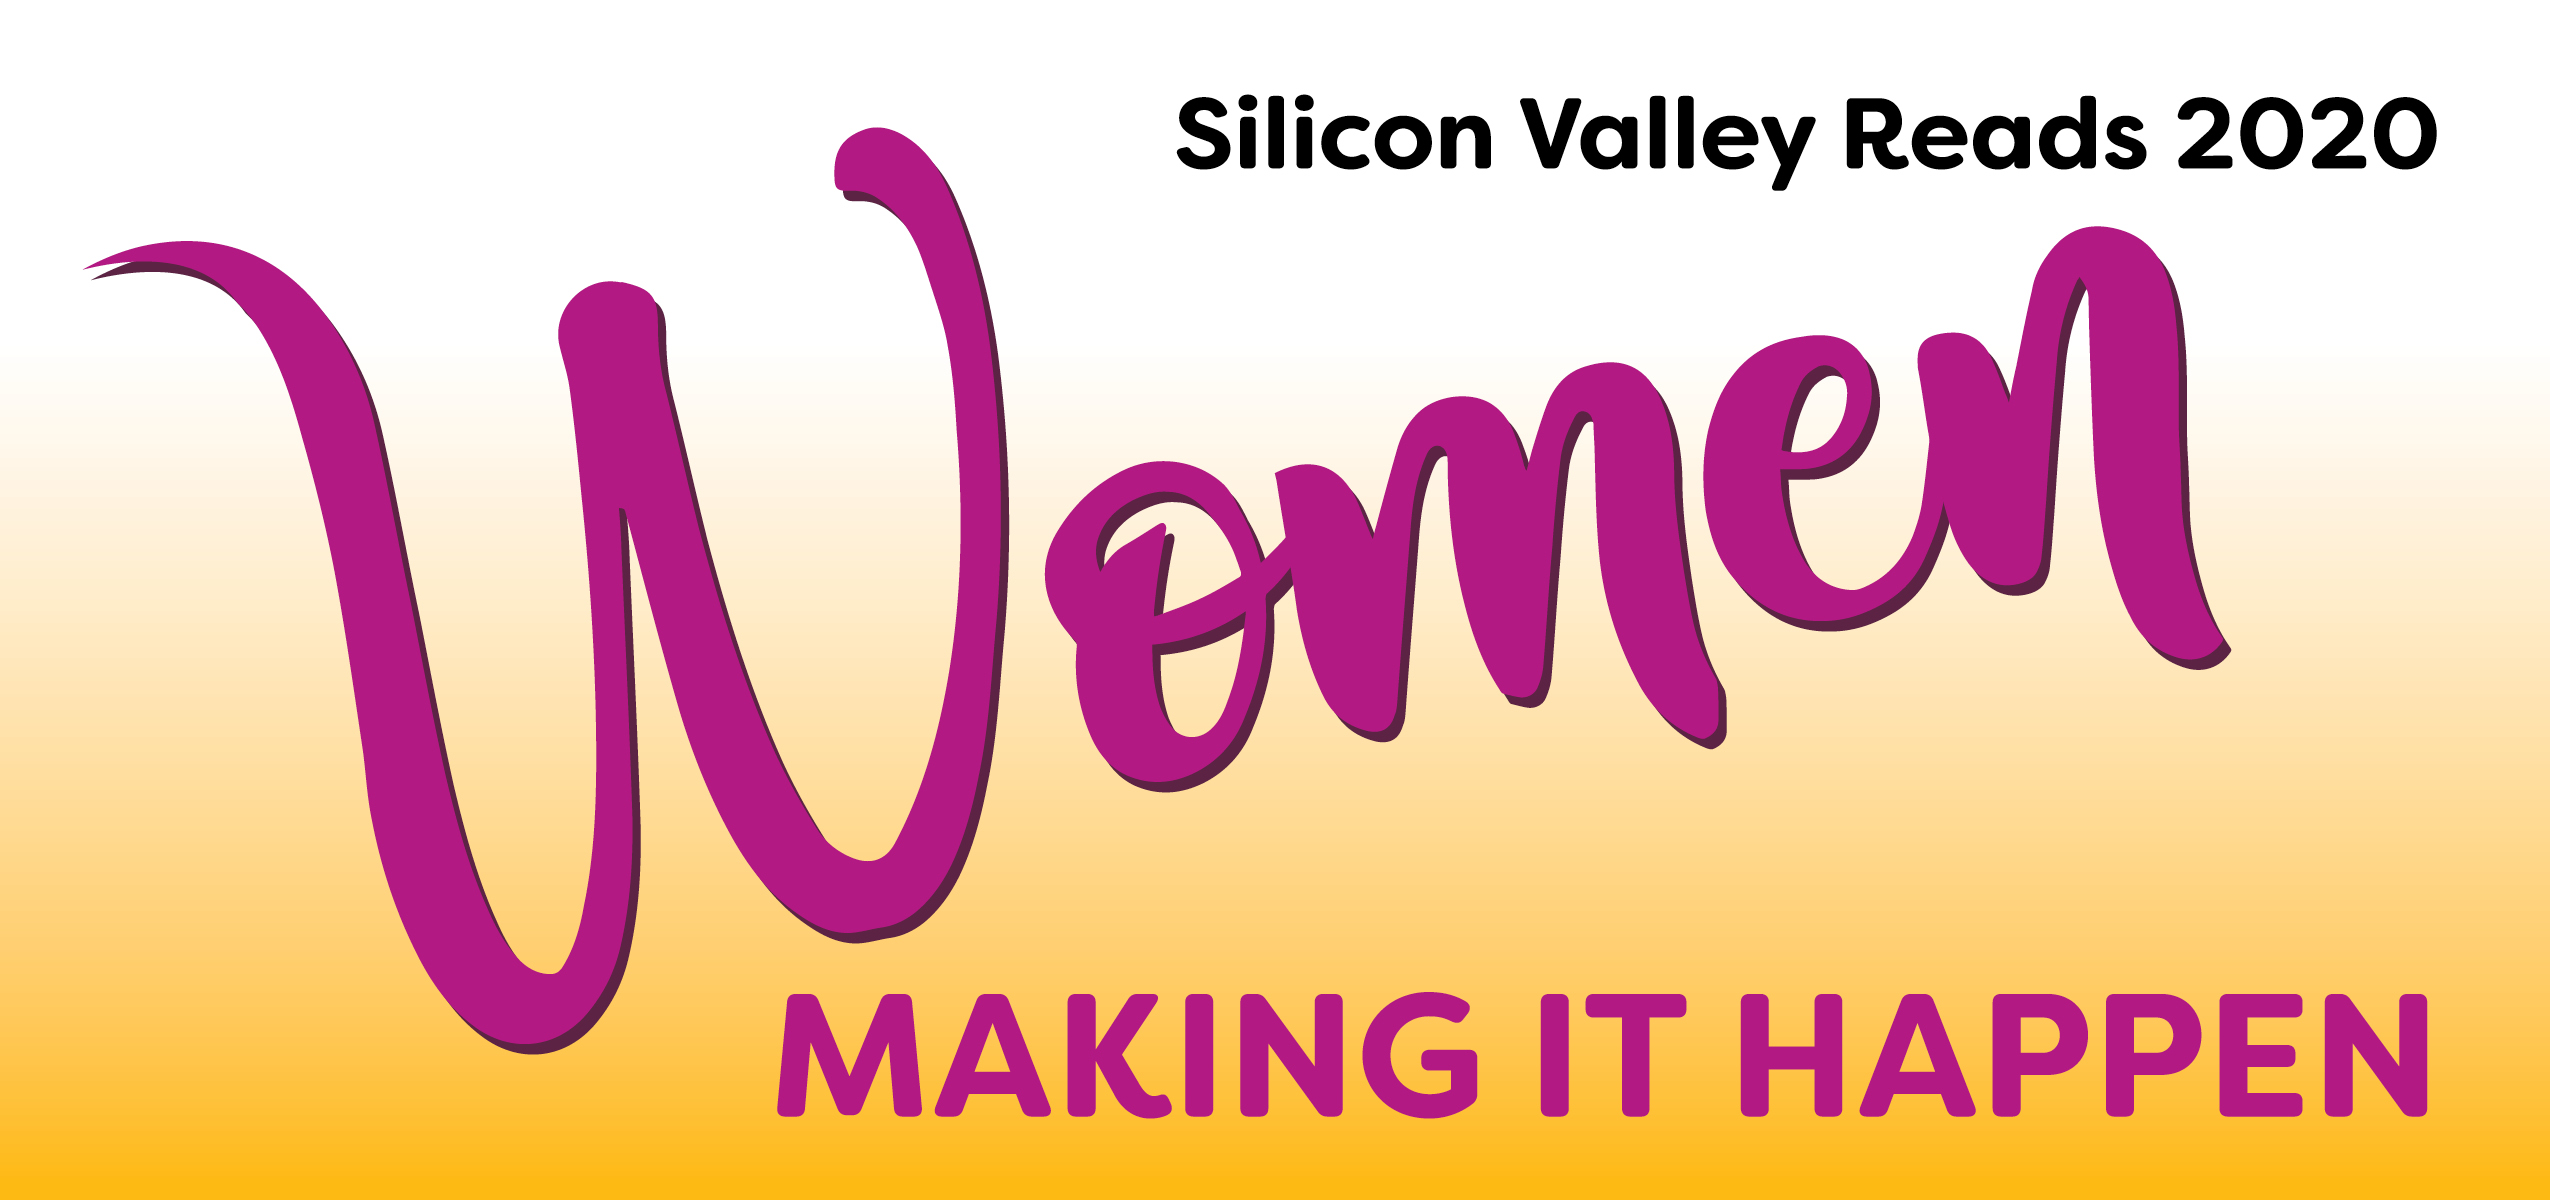 Silicon Valley Reads: Women Making It Happen